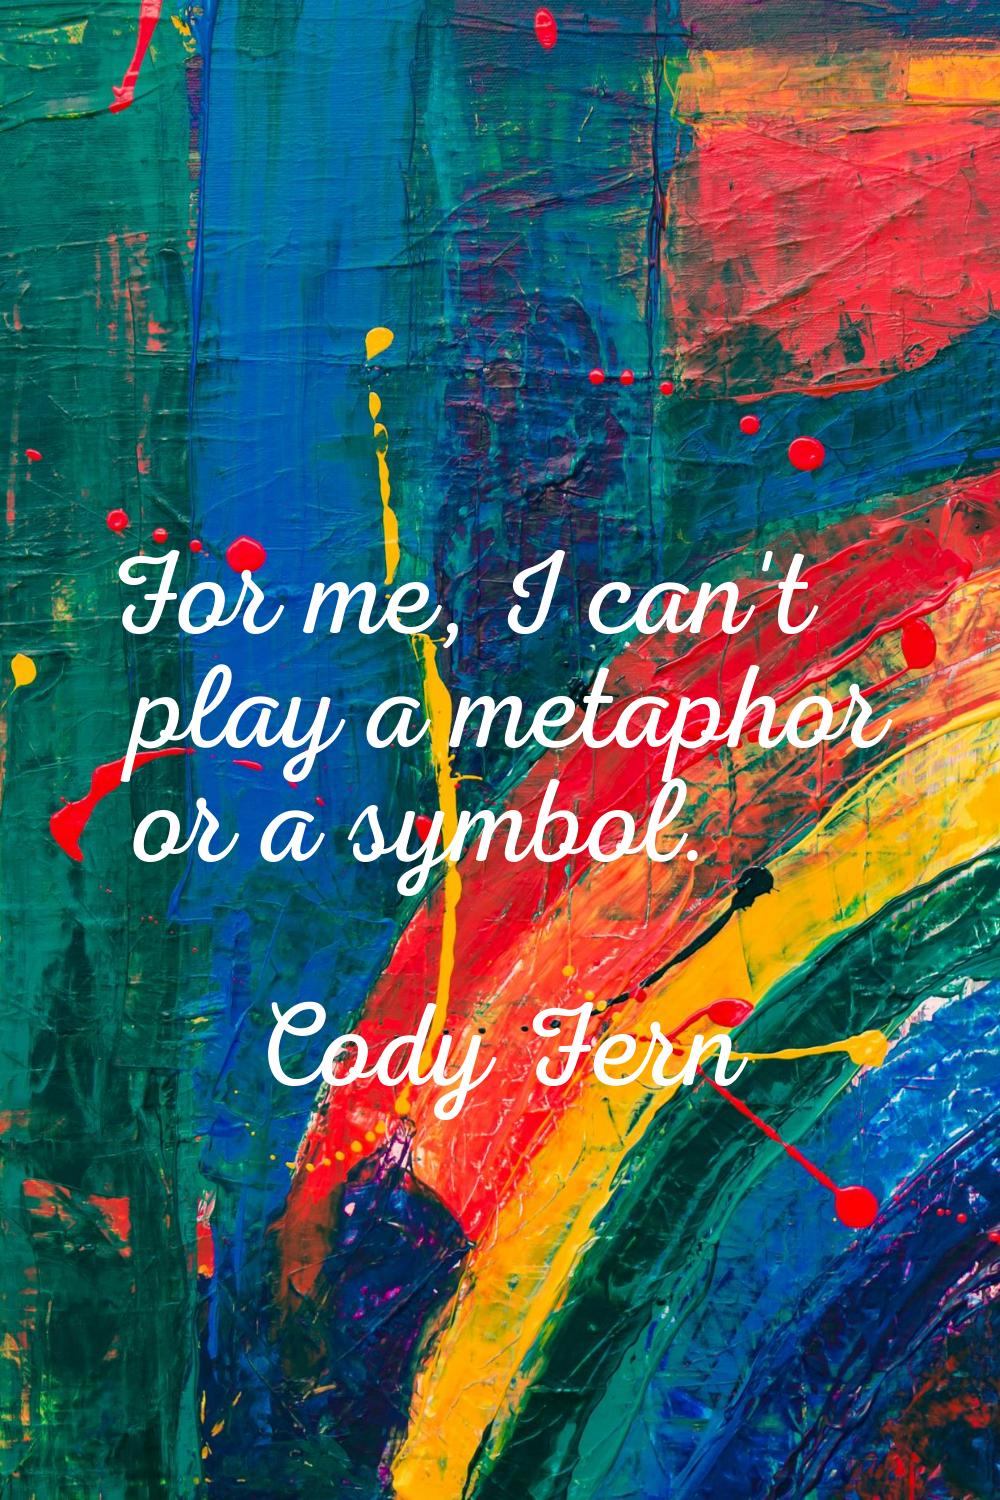 For me, I can't play a metaphor or a symbol.